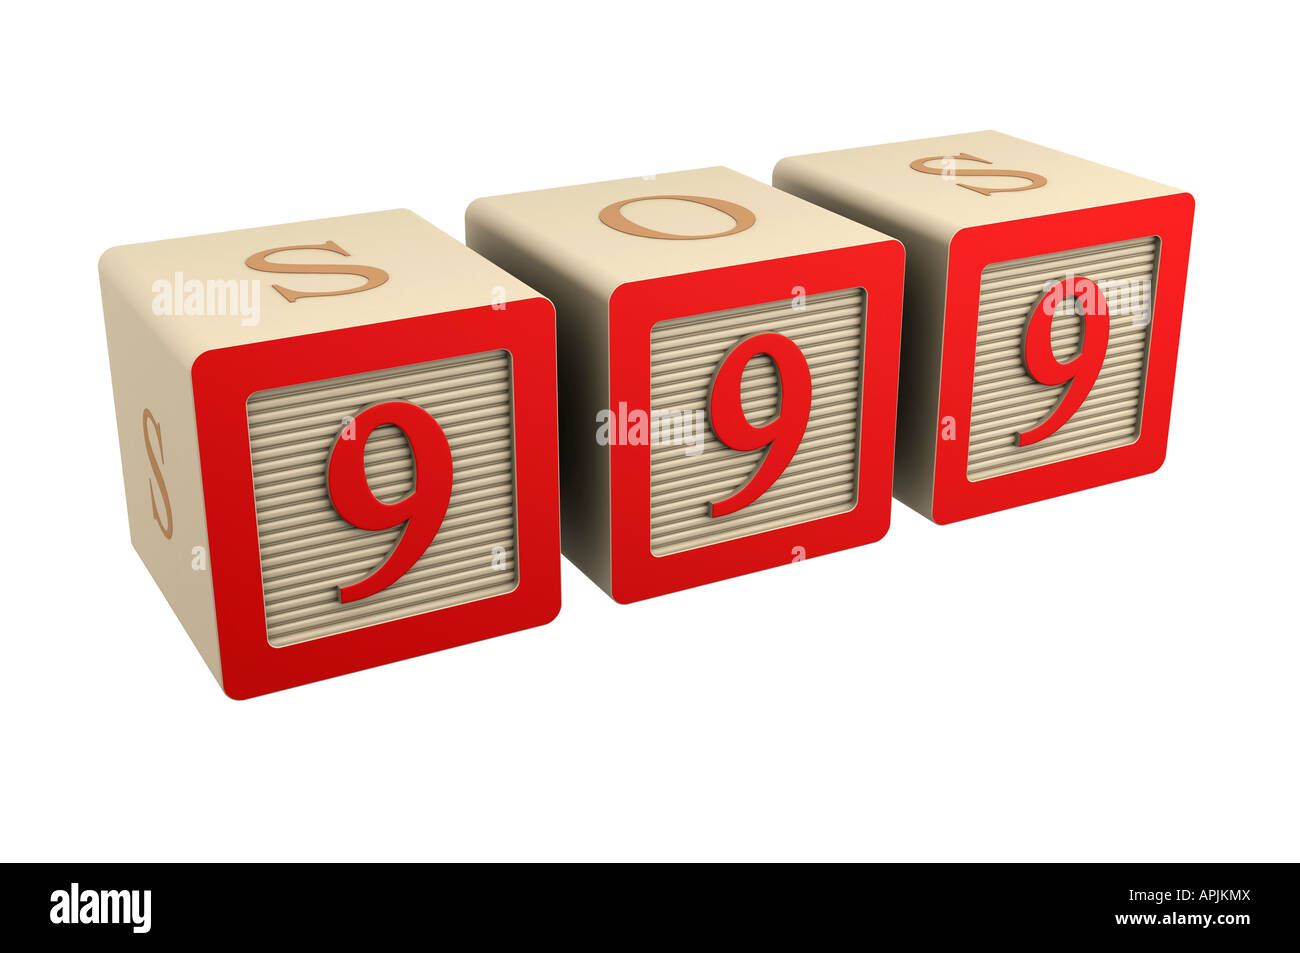 toy wooden block 999 emergency phone number sos Stock Photo